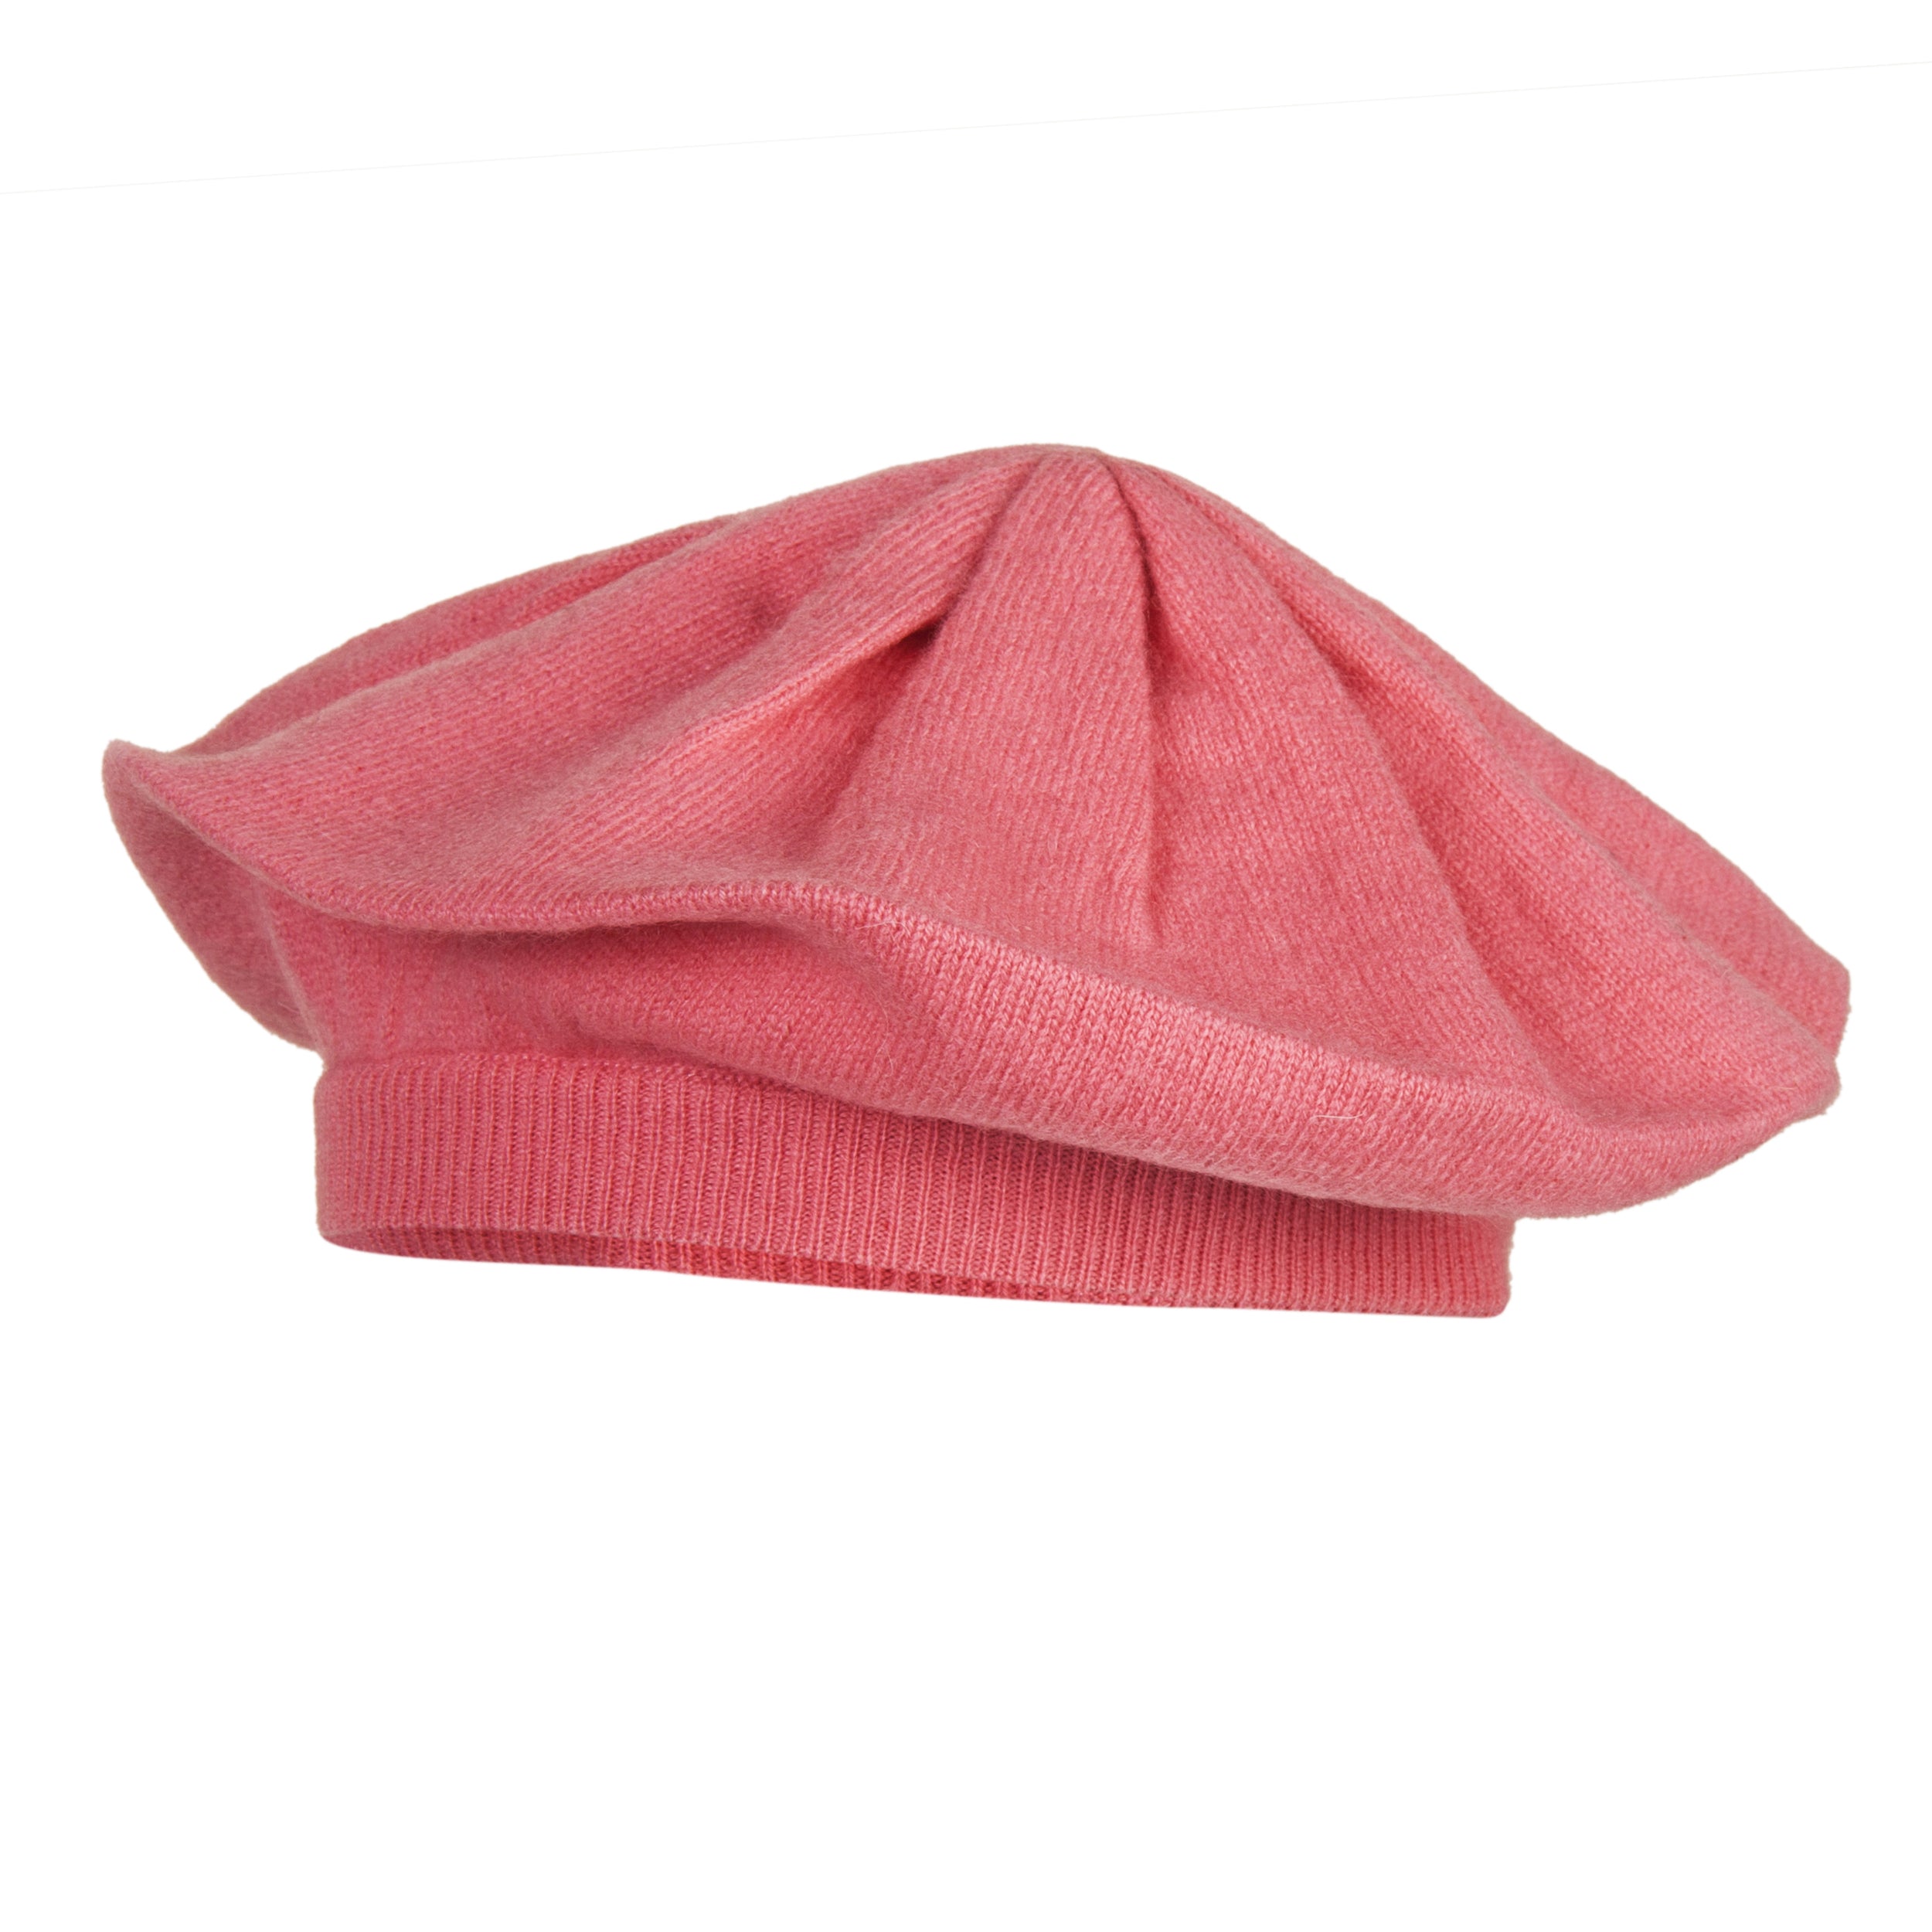 Coral Pink | Cashmere Beret | Shop at The Cashmere Choice London